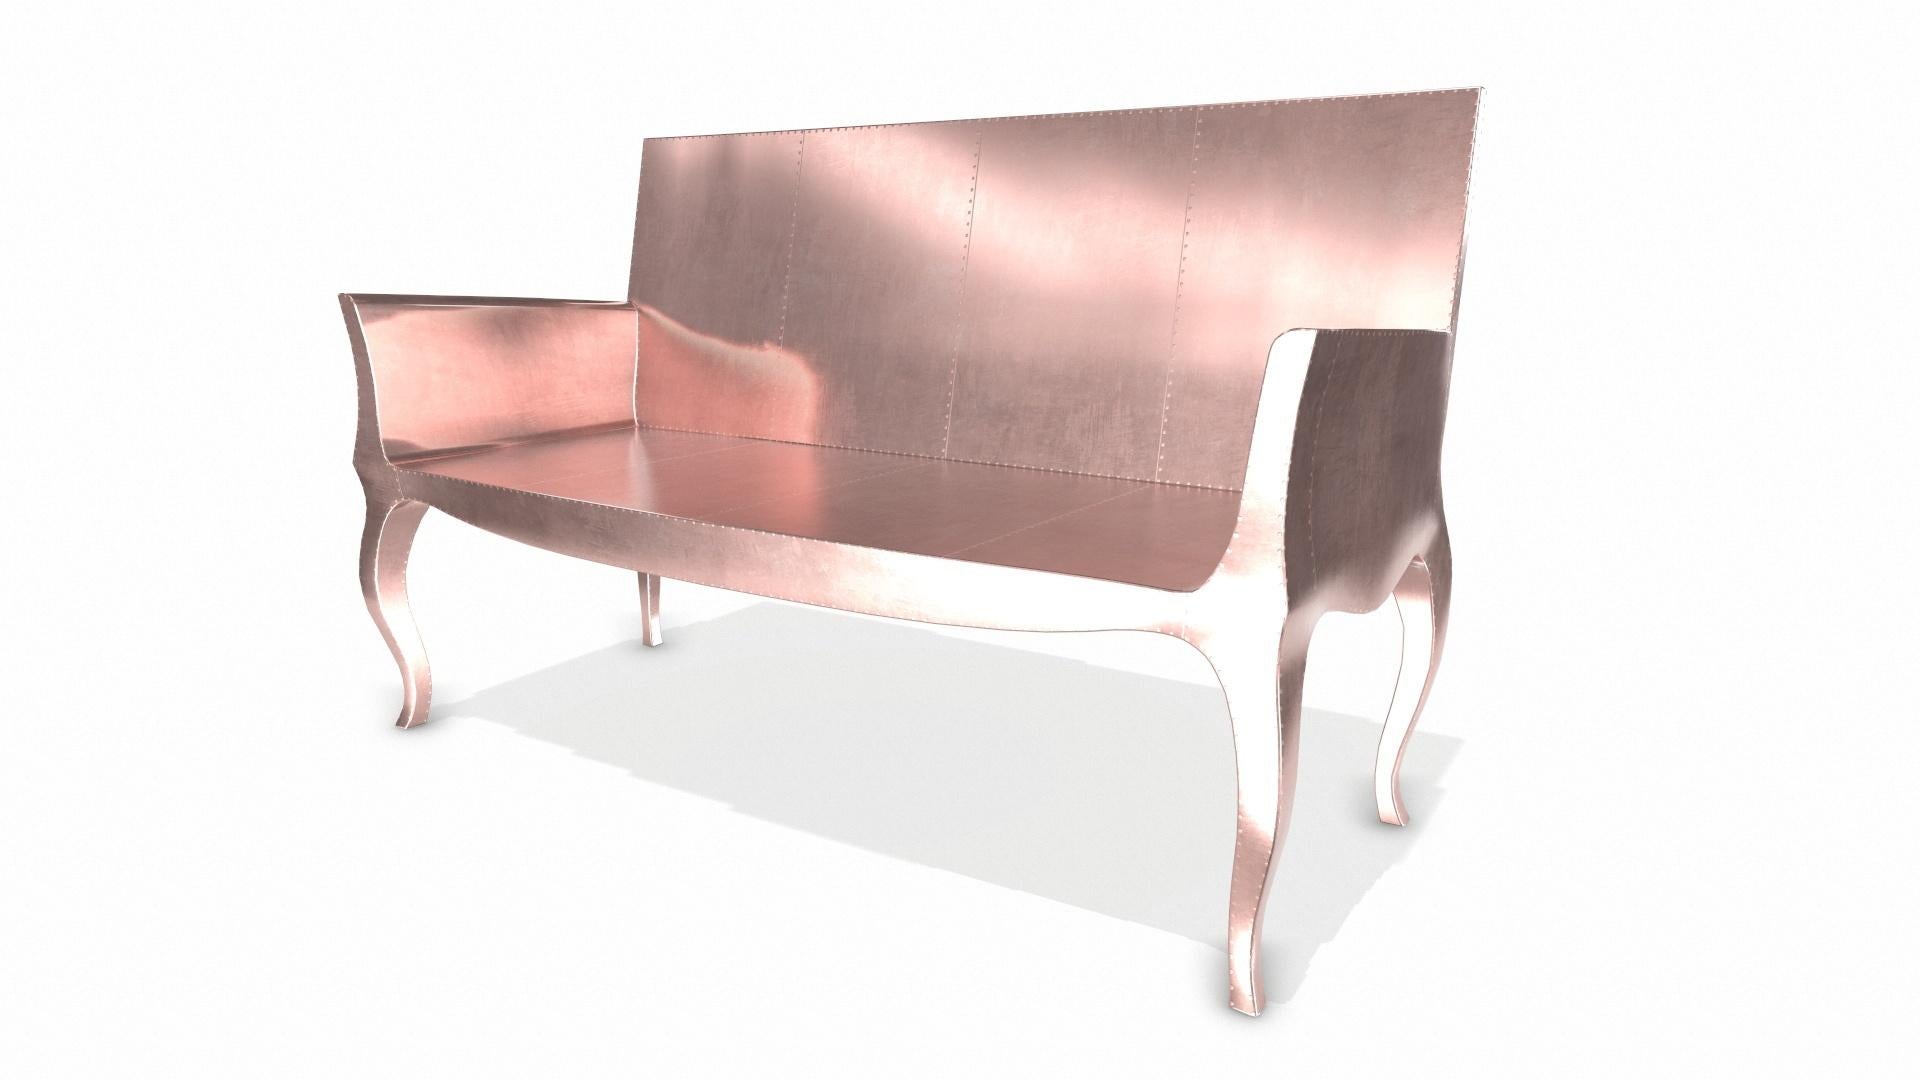 American Louise Settee Art Deco Daybeds in Smooth Copper by Paul Mathieu For S Odegard  For Sale